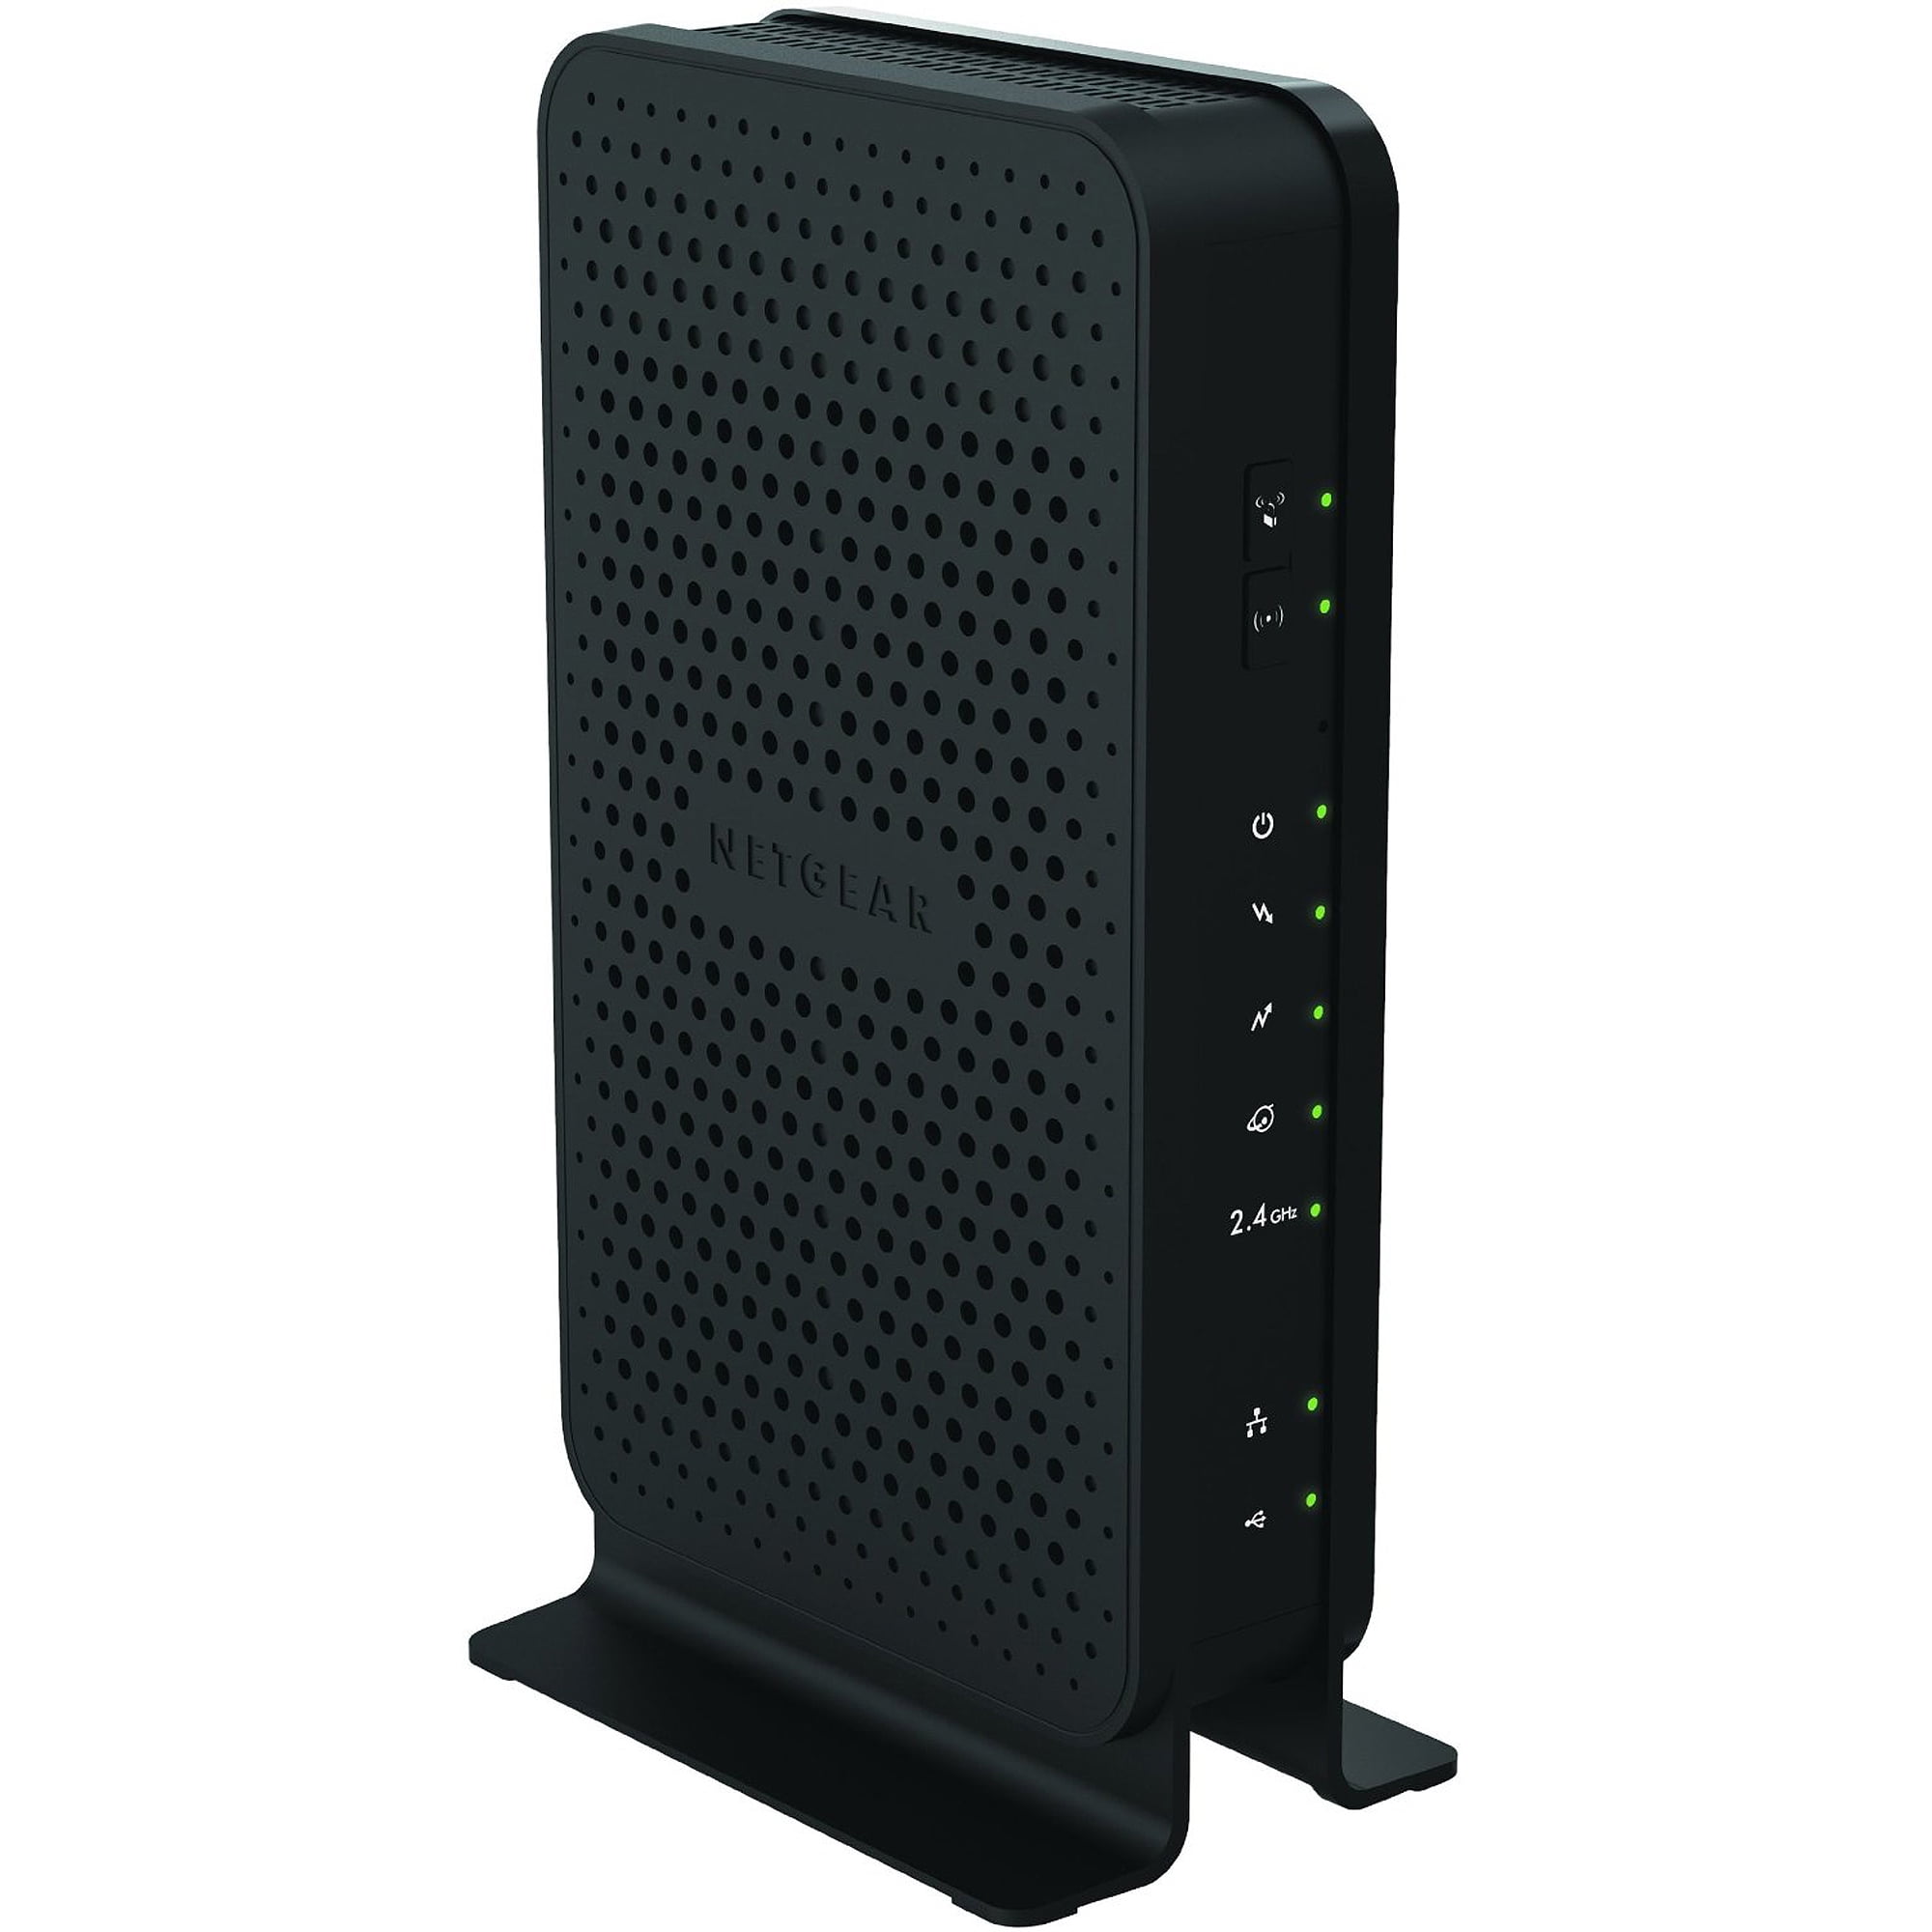 NETGEAR N300 (8x4) WiFi Cable Modem Router Combo C3000, DOCSIS 3.0   Certified for Xfinity by Comcast, Spectrum, COX & more (C3000) 